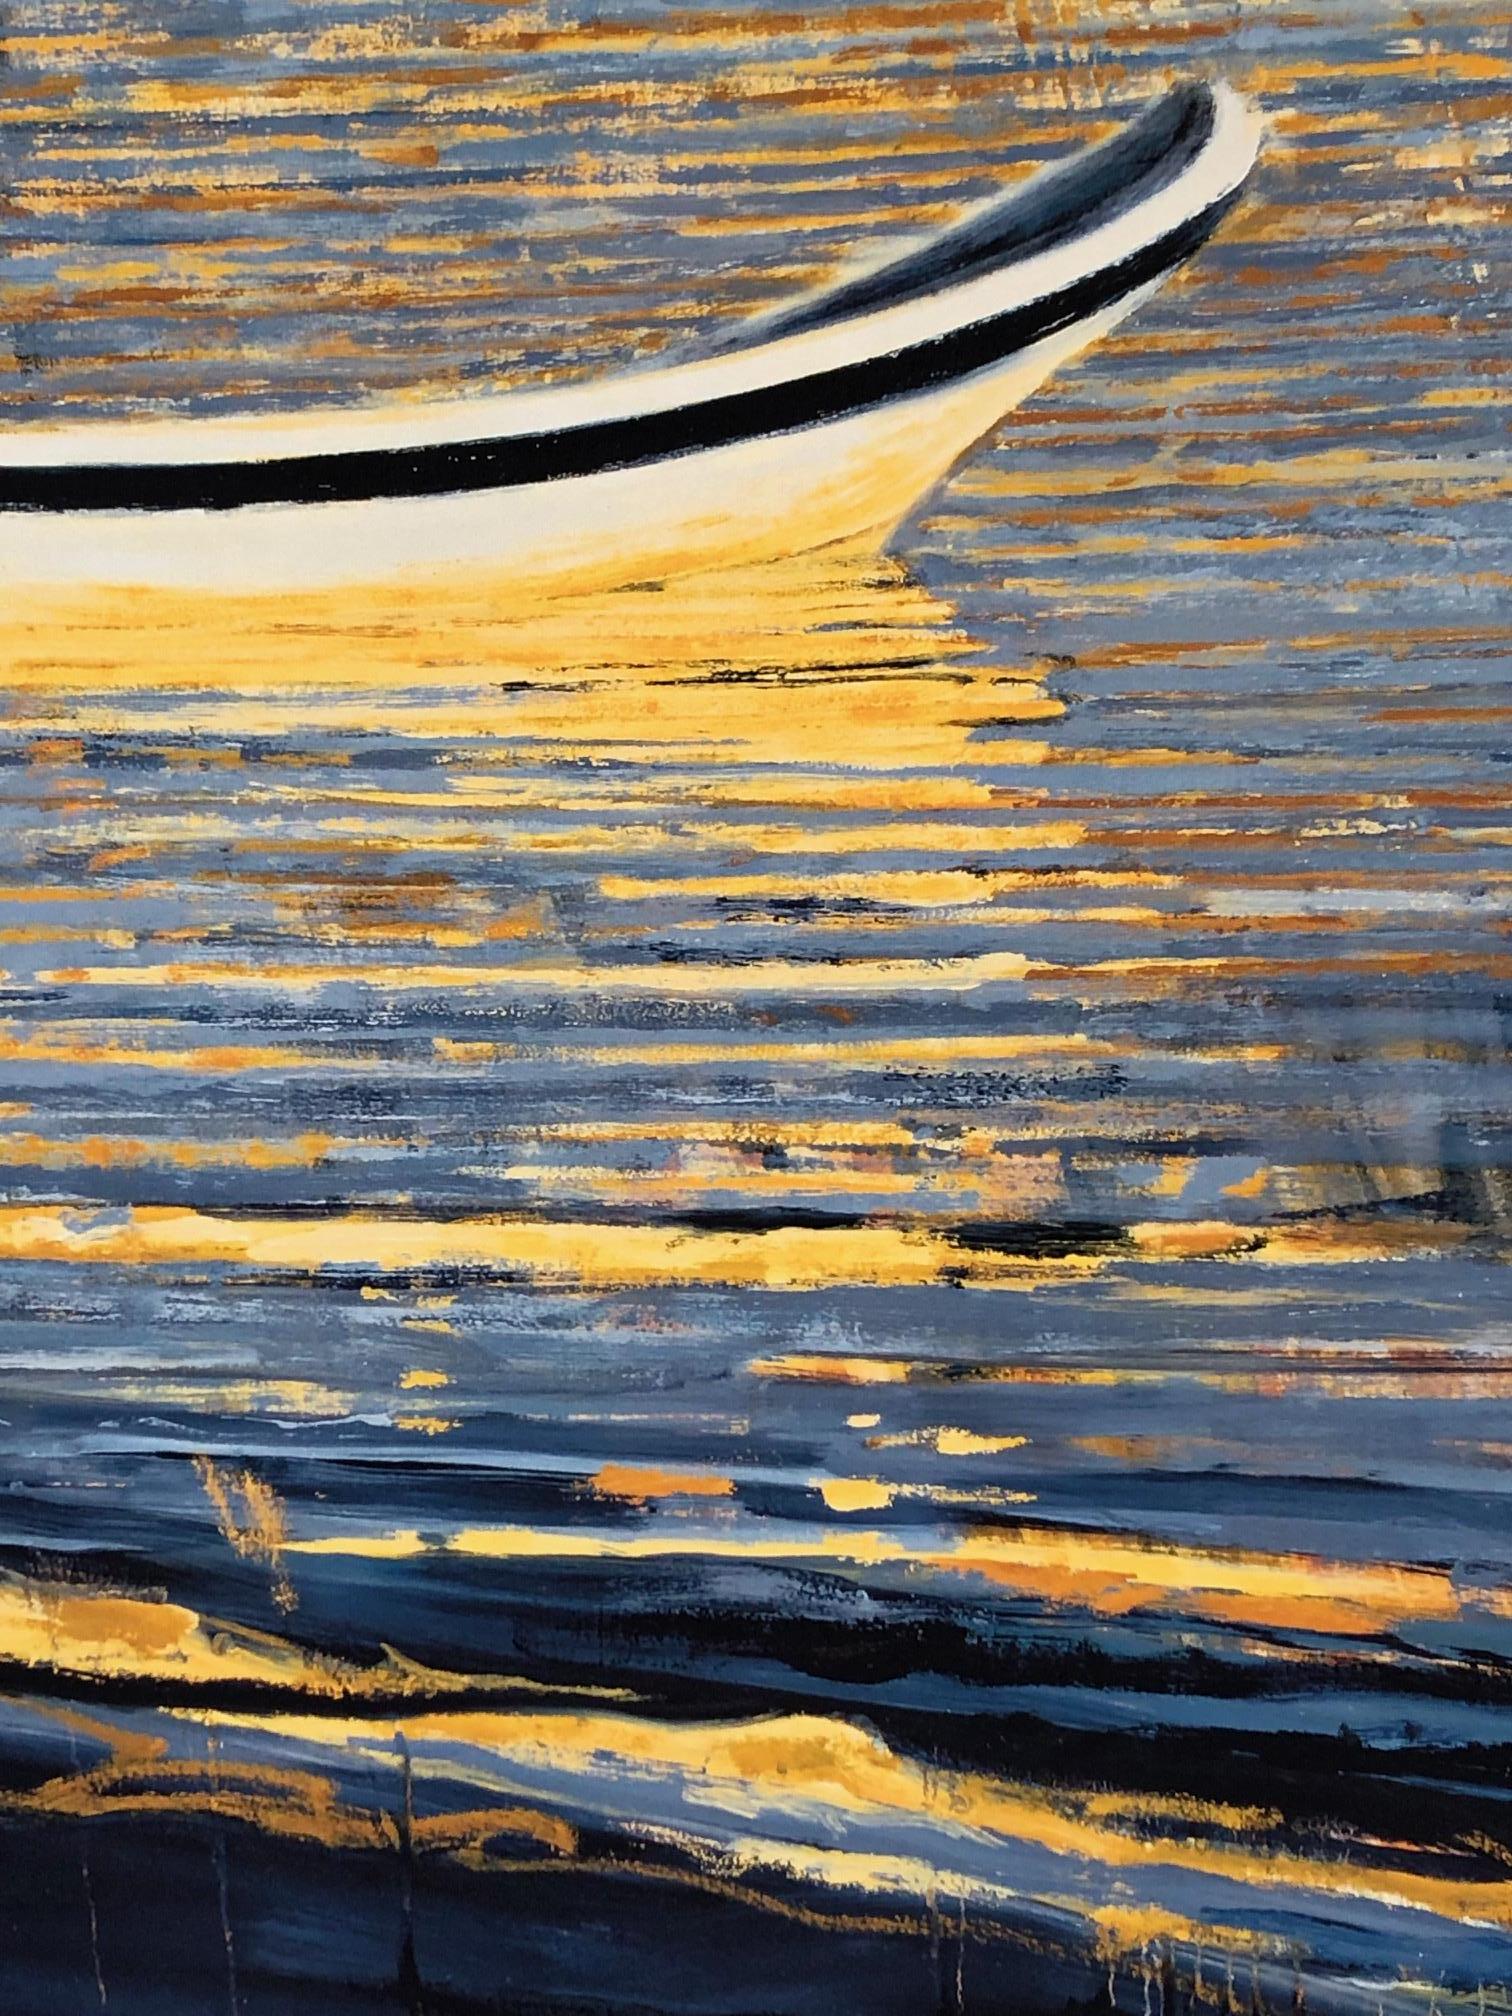 Carole Bolsey Landscape Print - "Waterfields Boats at Akumal" Blue stripes reflecting boats on shimmering water